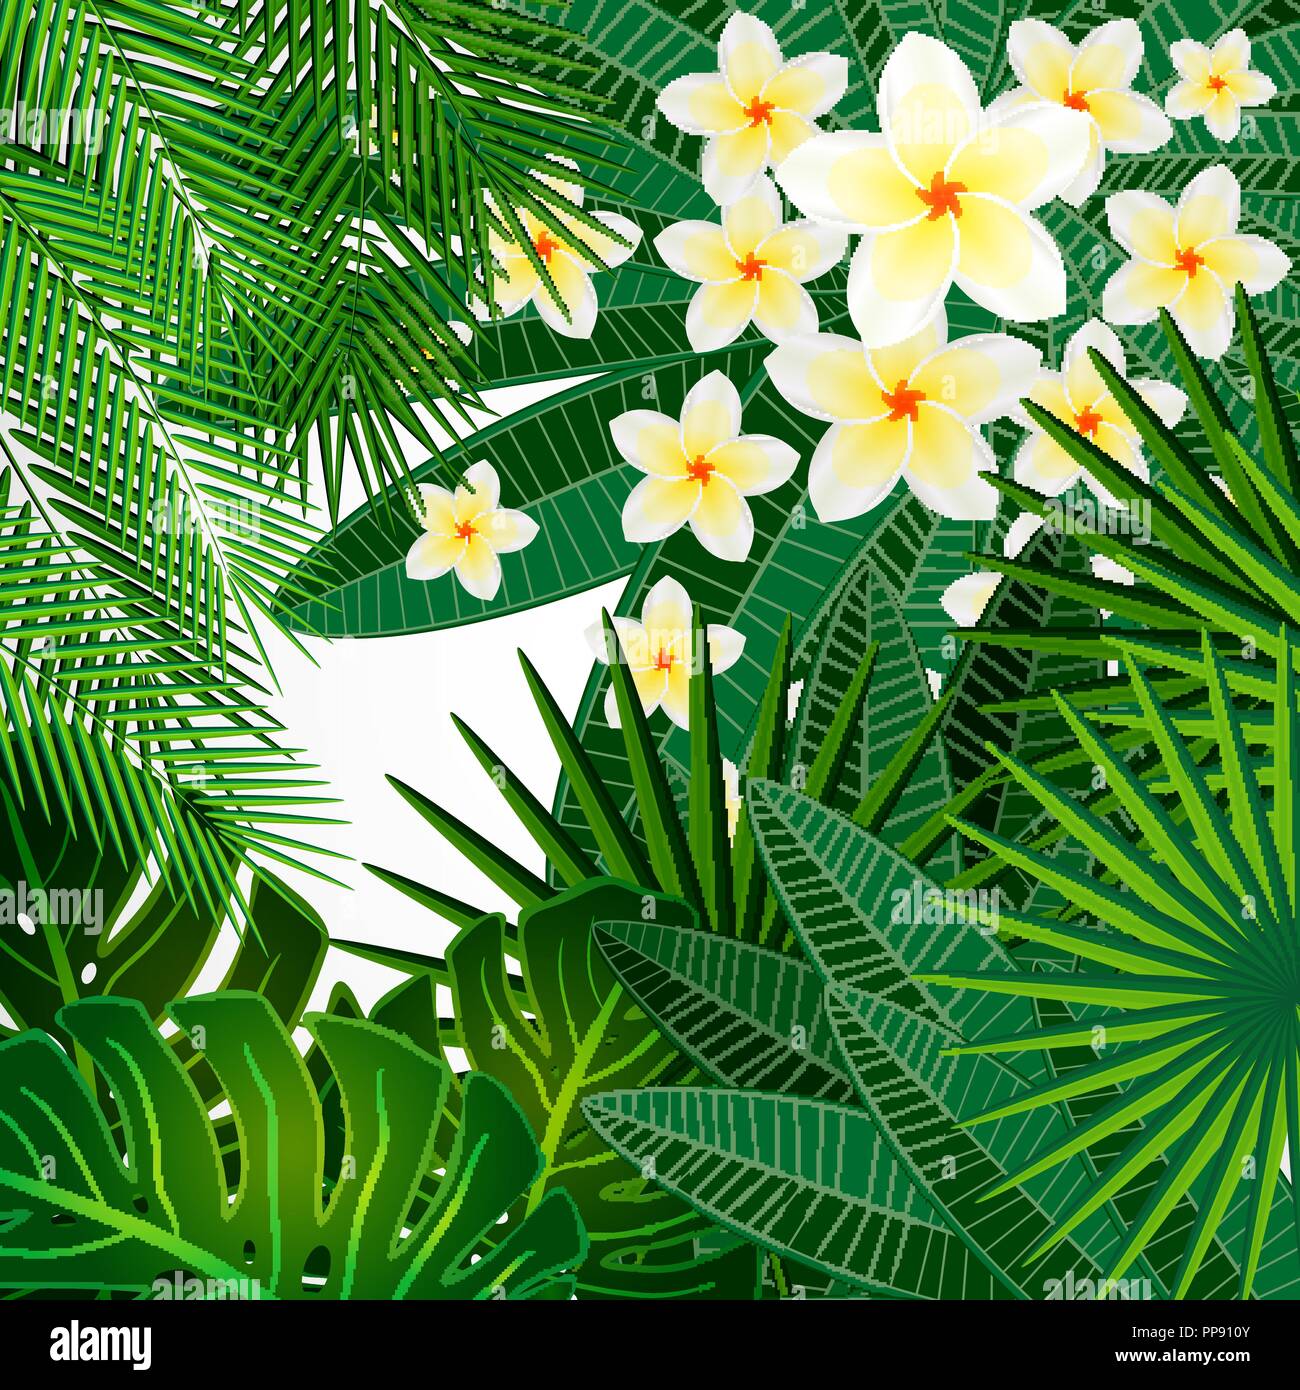 Eps10 Floral design background. Plumeria flowers and tropical leaves. Stock Vector